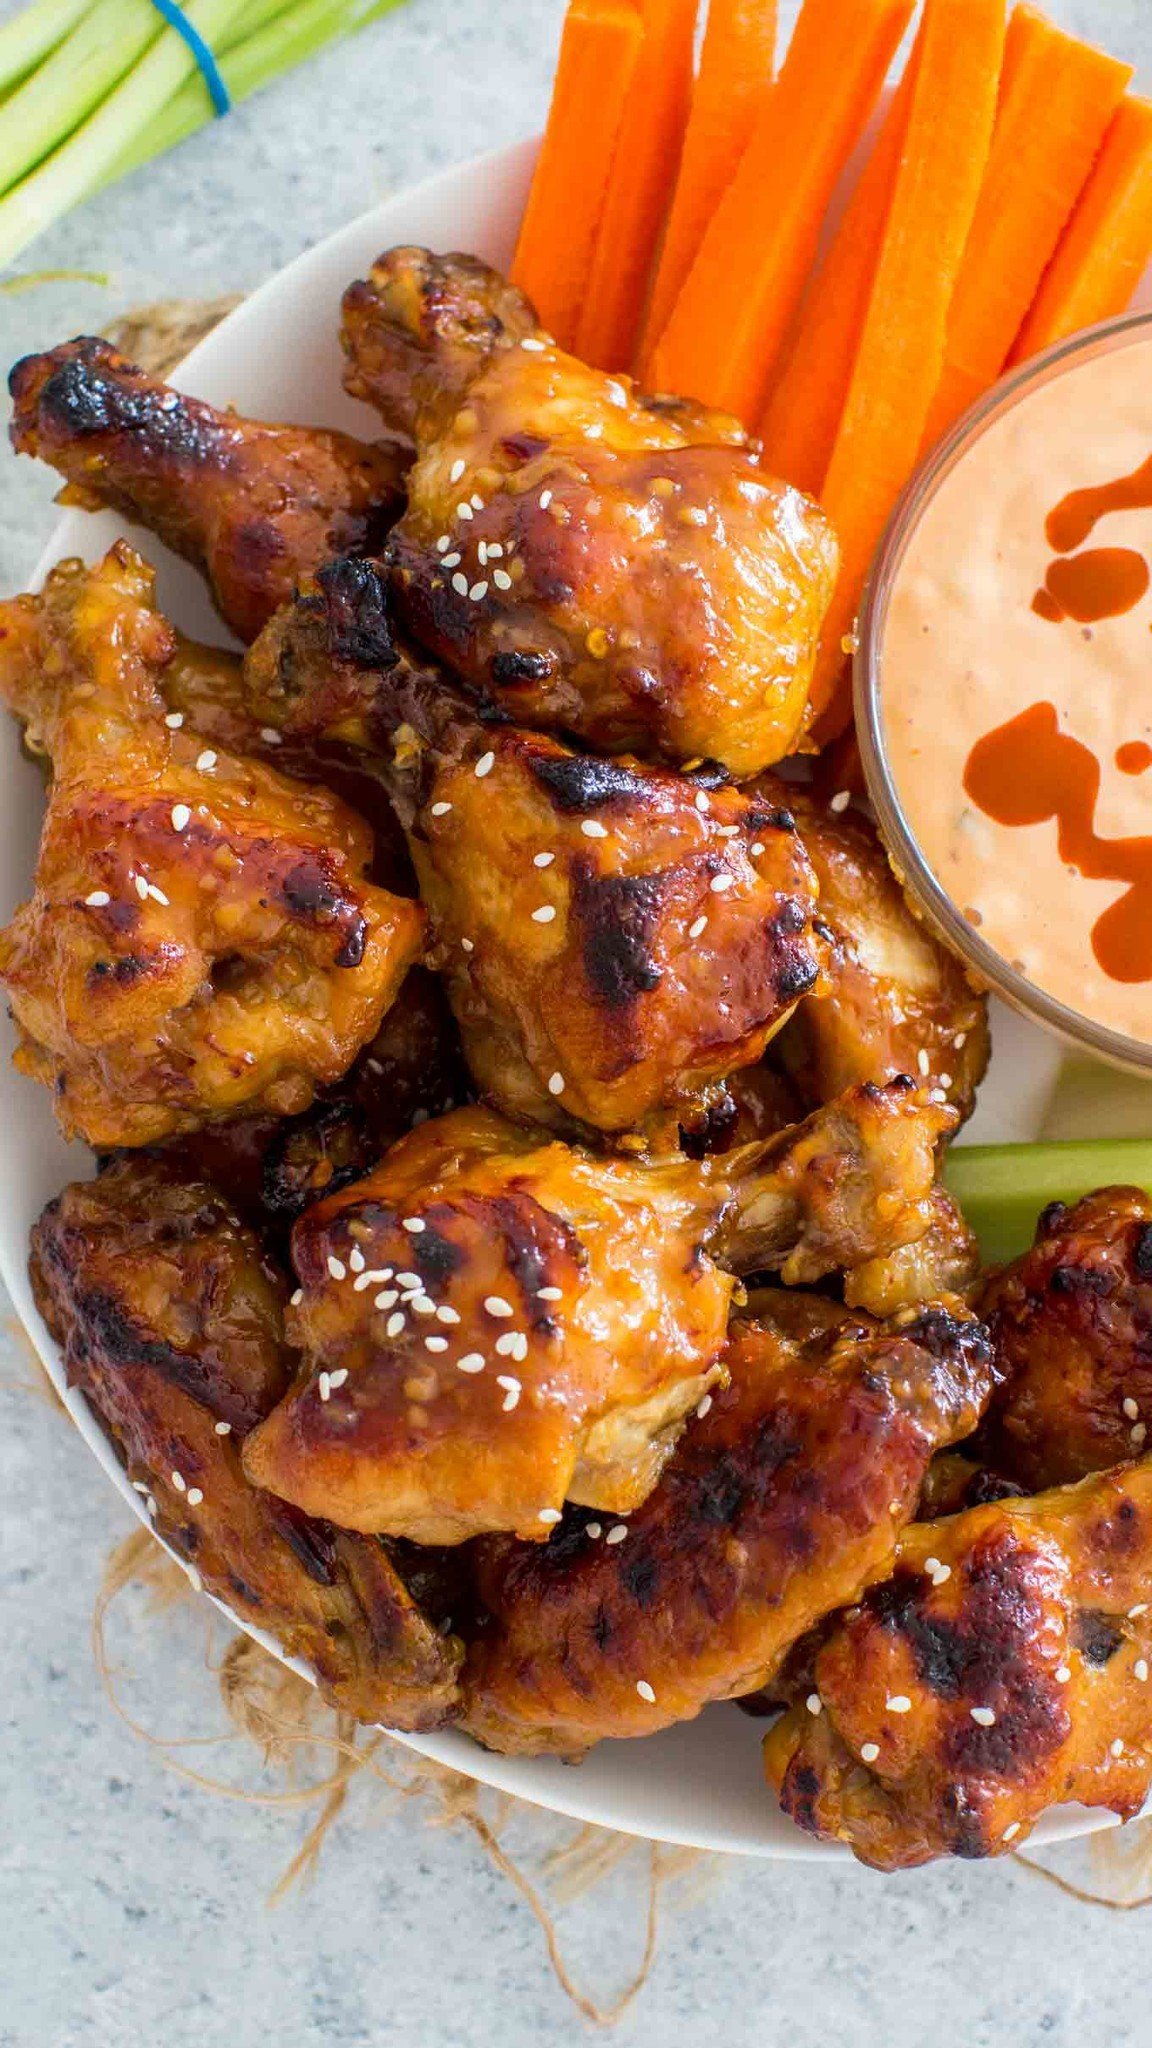 https://www.imore.com/sites/imore.com/files/styles/large/public/field/image/2019/01/sweet-and-savory-meals-best-instant-pot-chicken-wings.jpg?itok=uXqpFPof